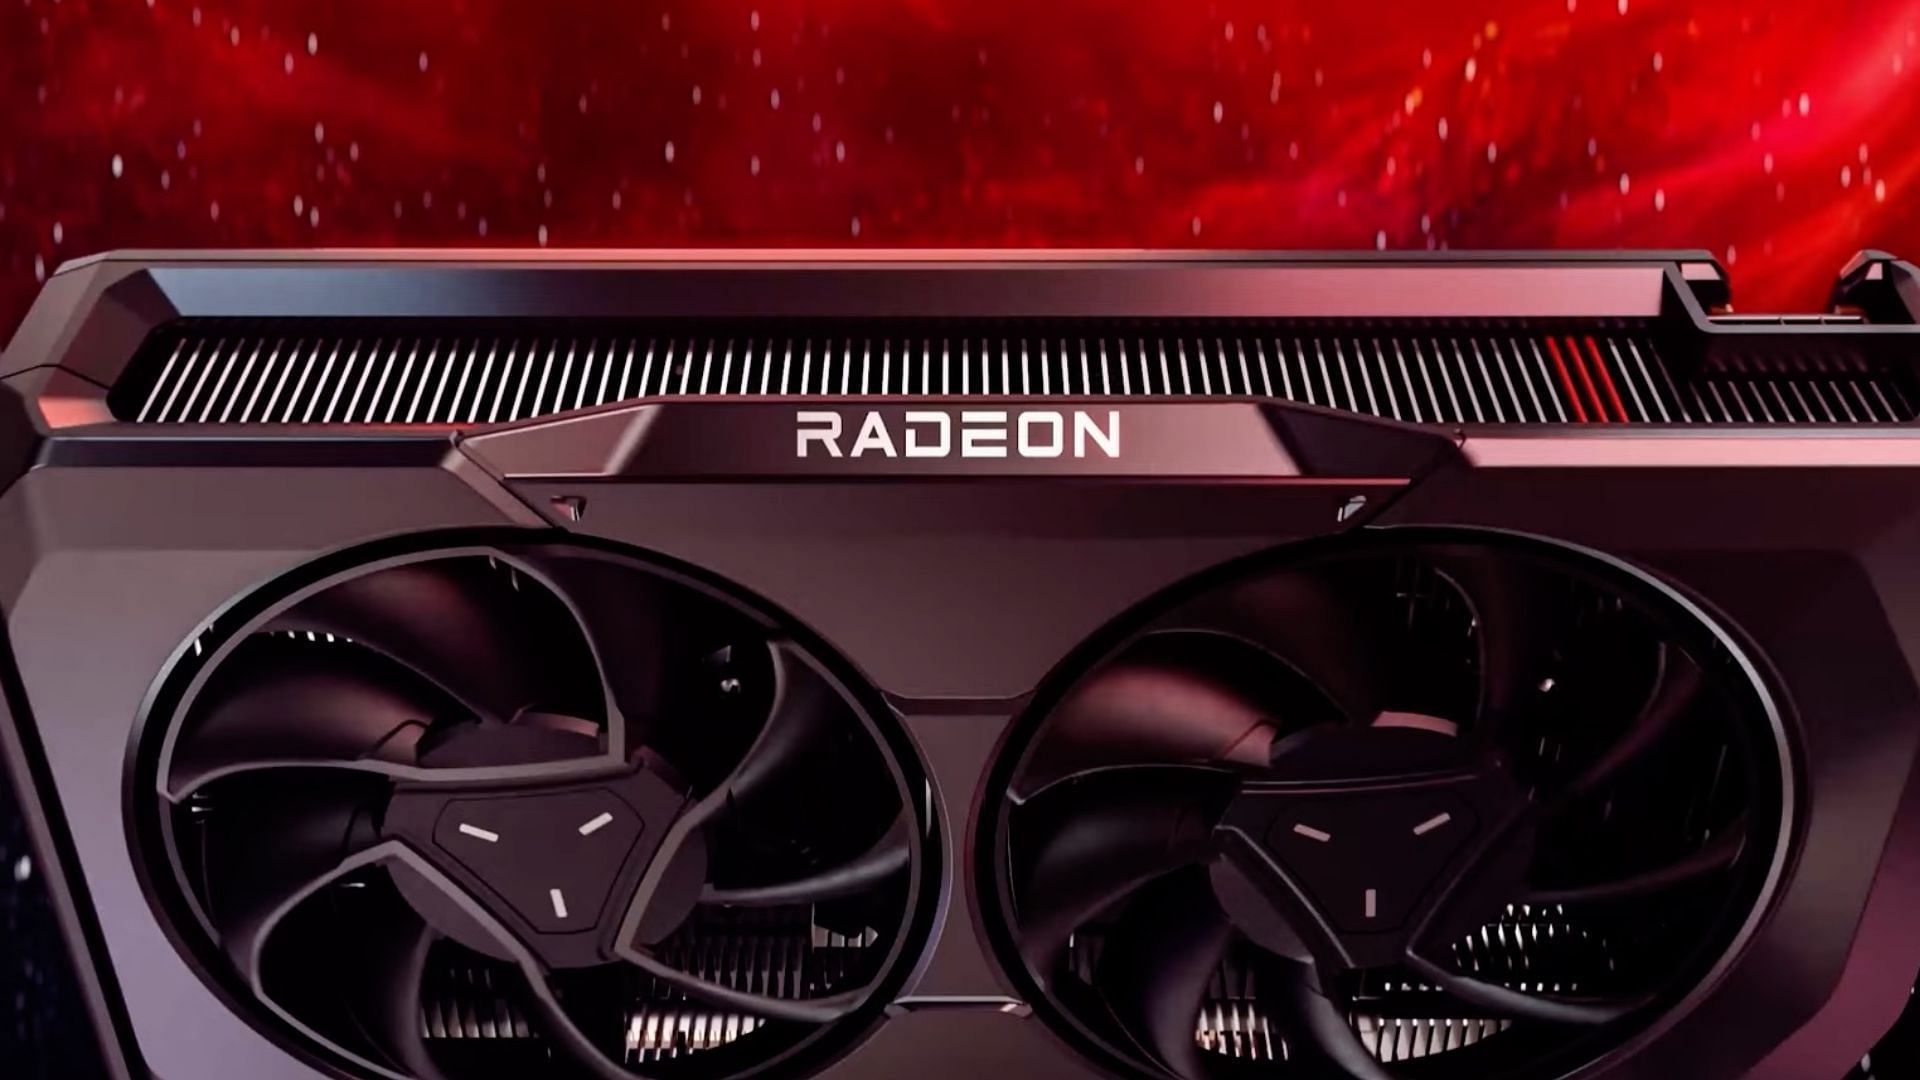 AMD Radeon RX 7600 XT release date, price, specs, and benchmarks